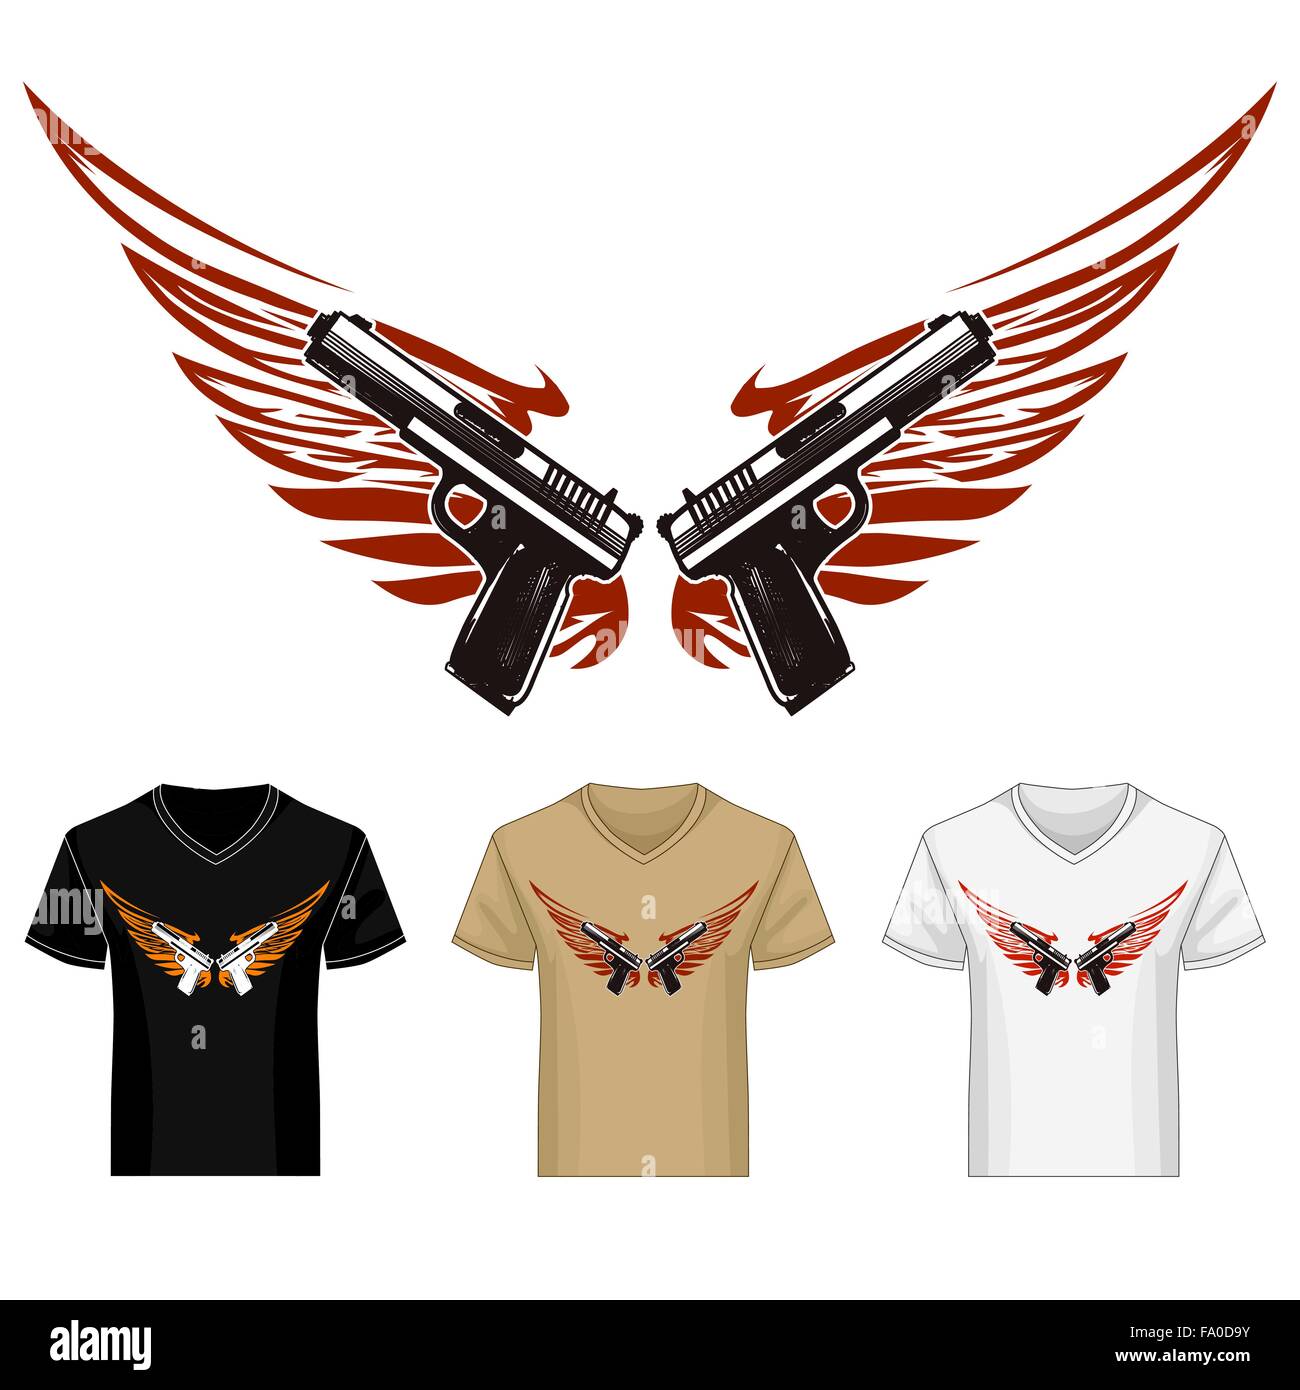 Two guns guns with wings shirt template. Illustration in tattoo style. Stock Vector